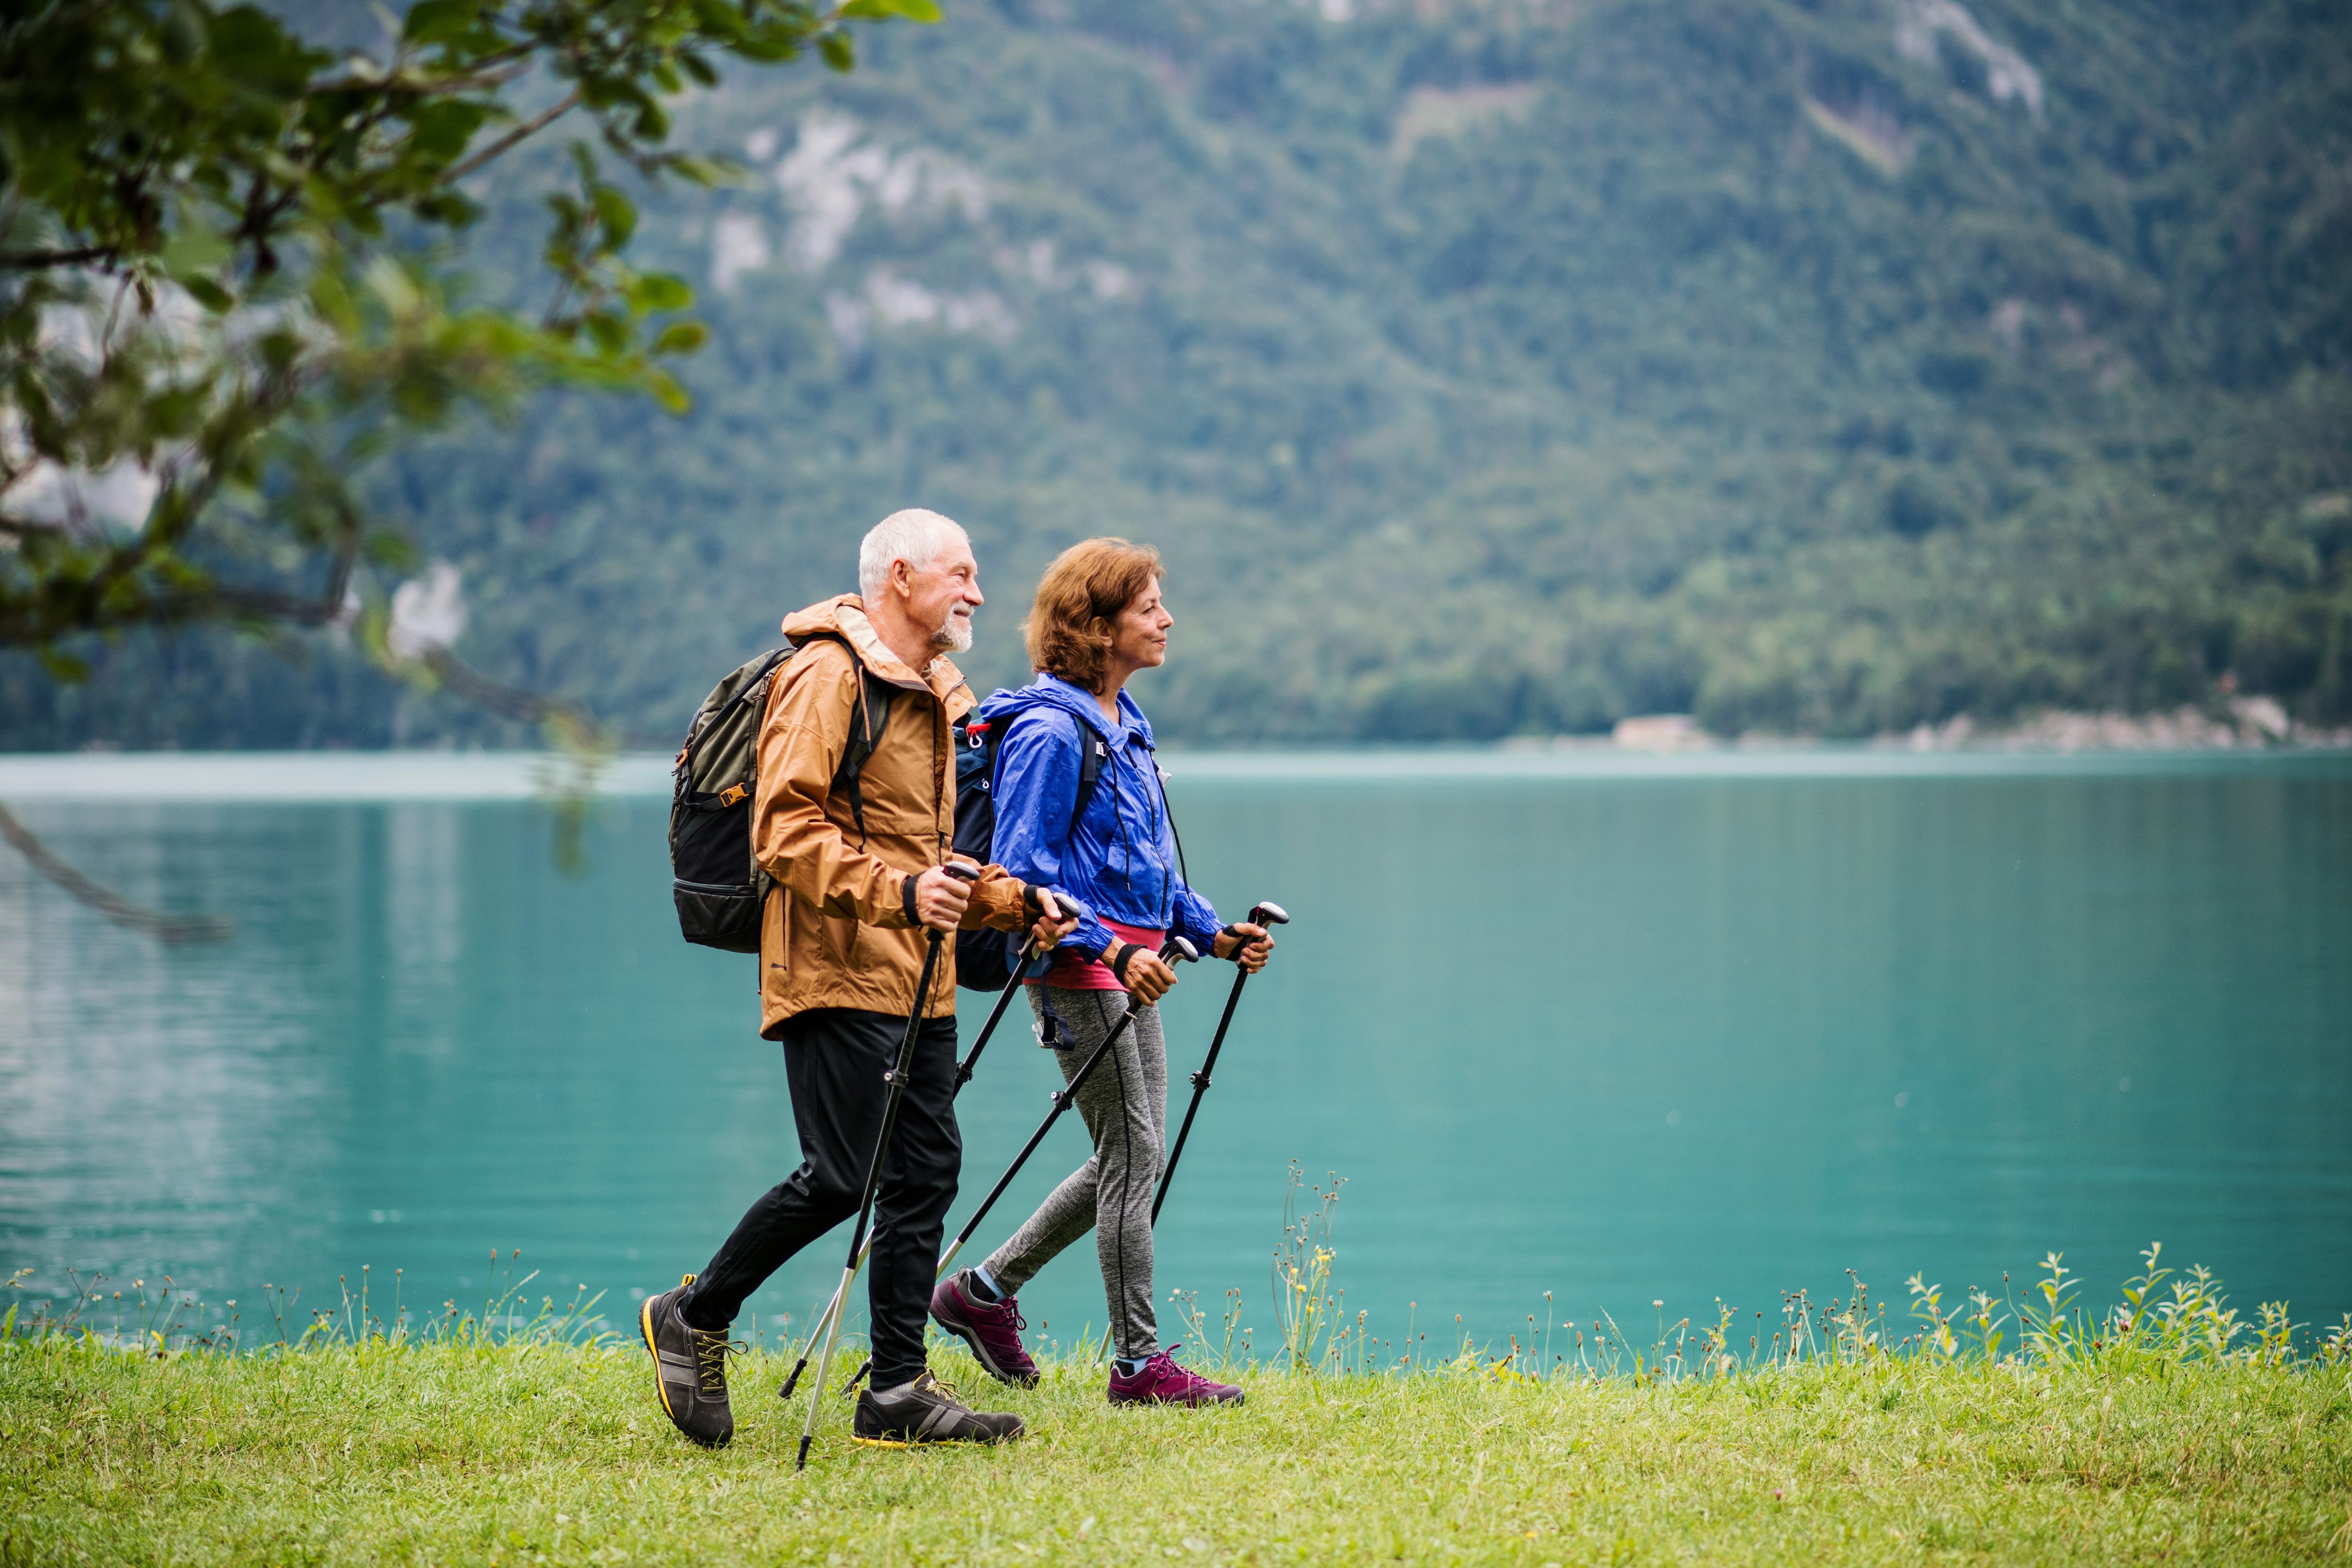 A side view of senior pensioner couple hiking by lake in nature.